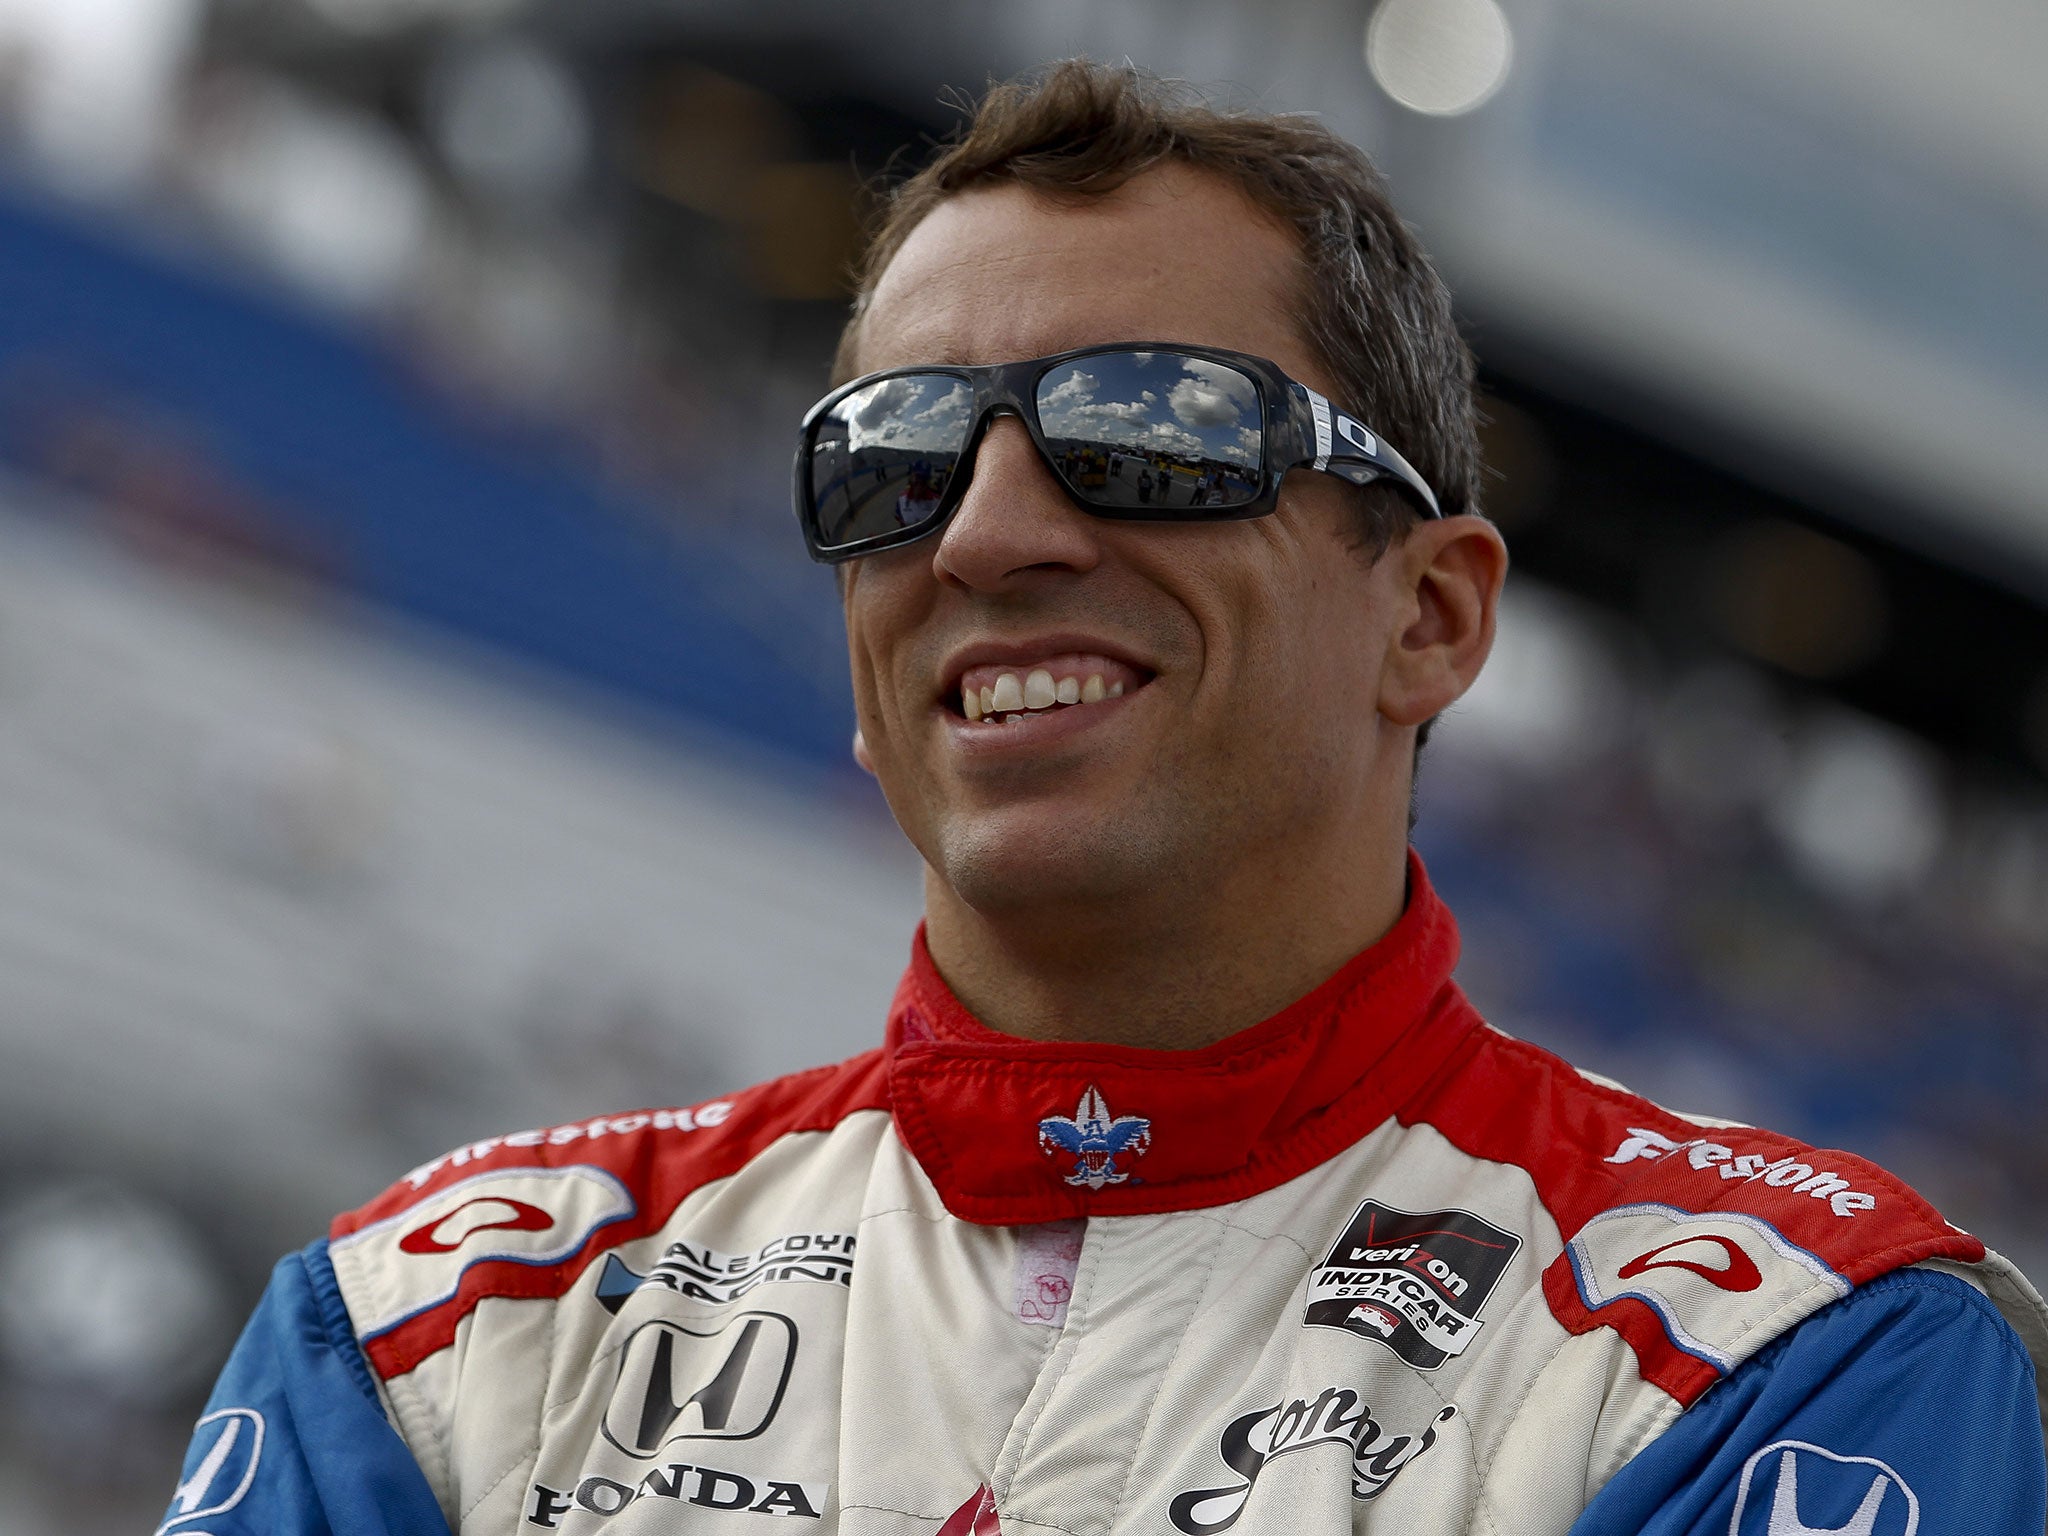 IndyCar driver Justin Wilson is in a coma and said to be in a critical condition